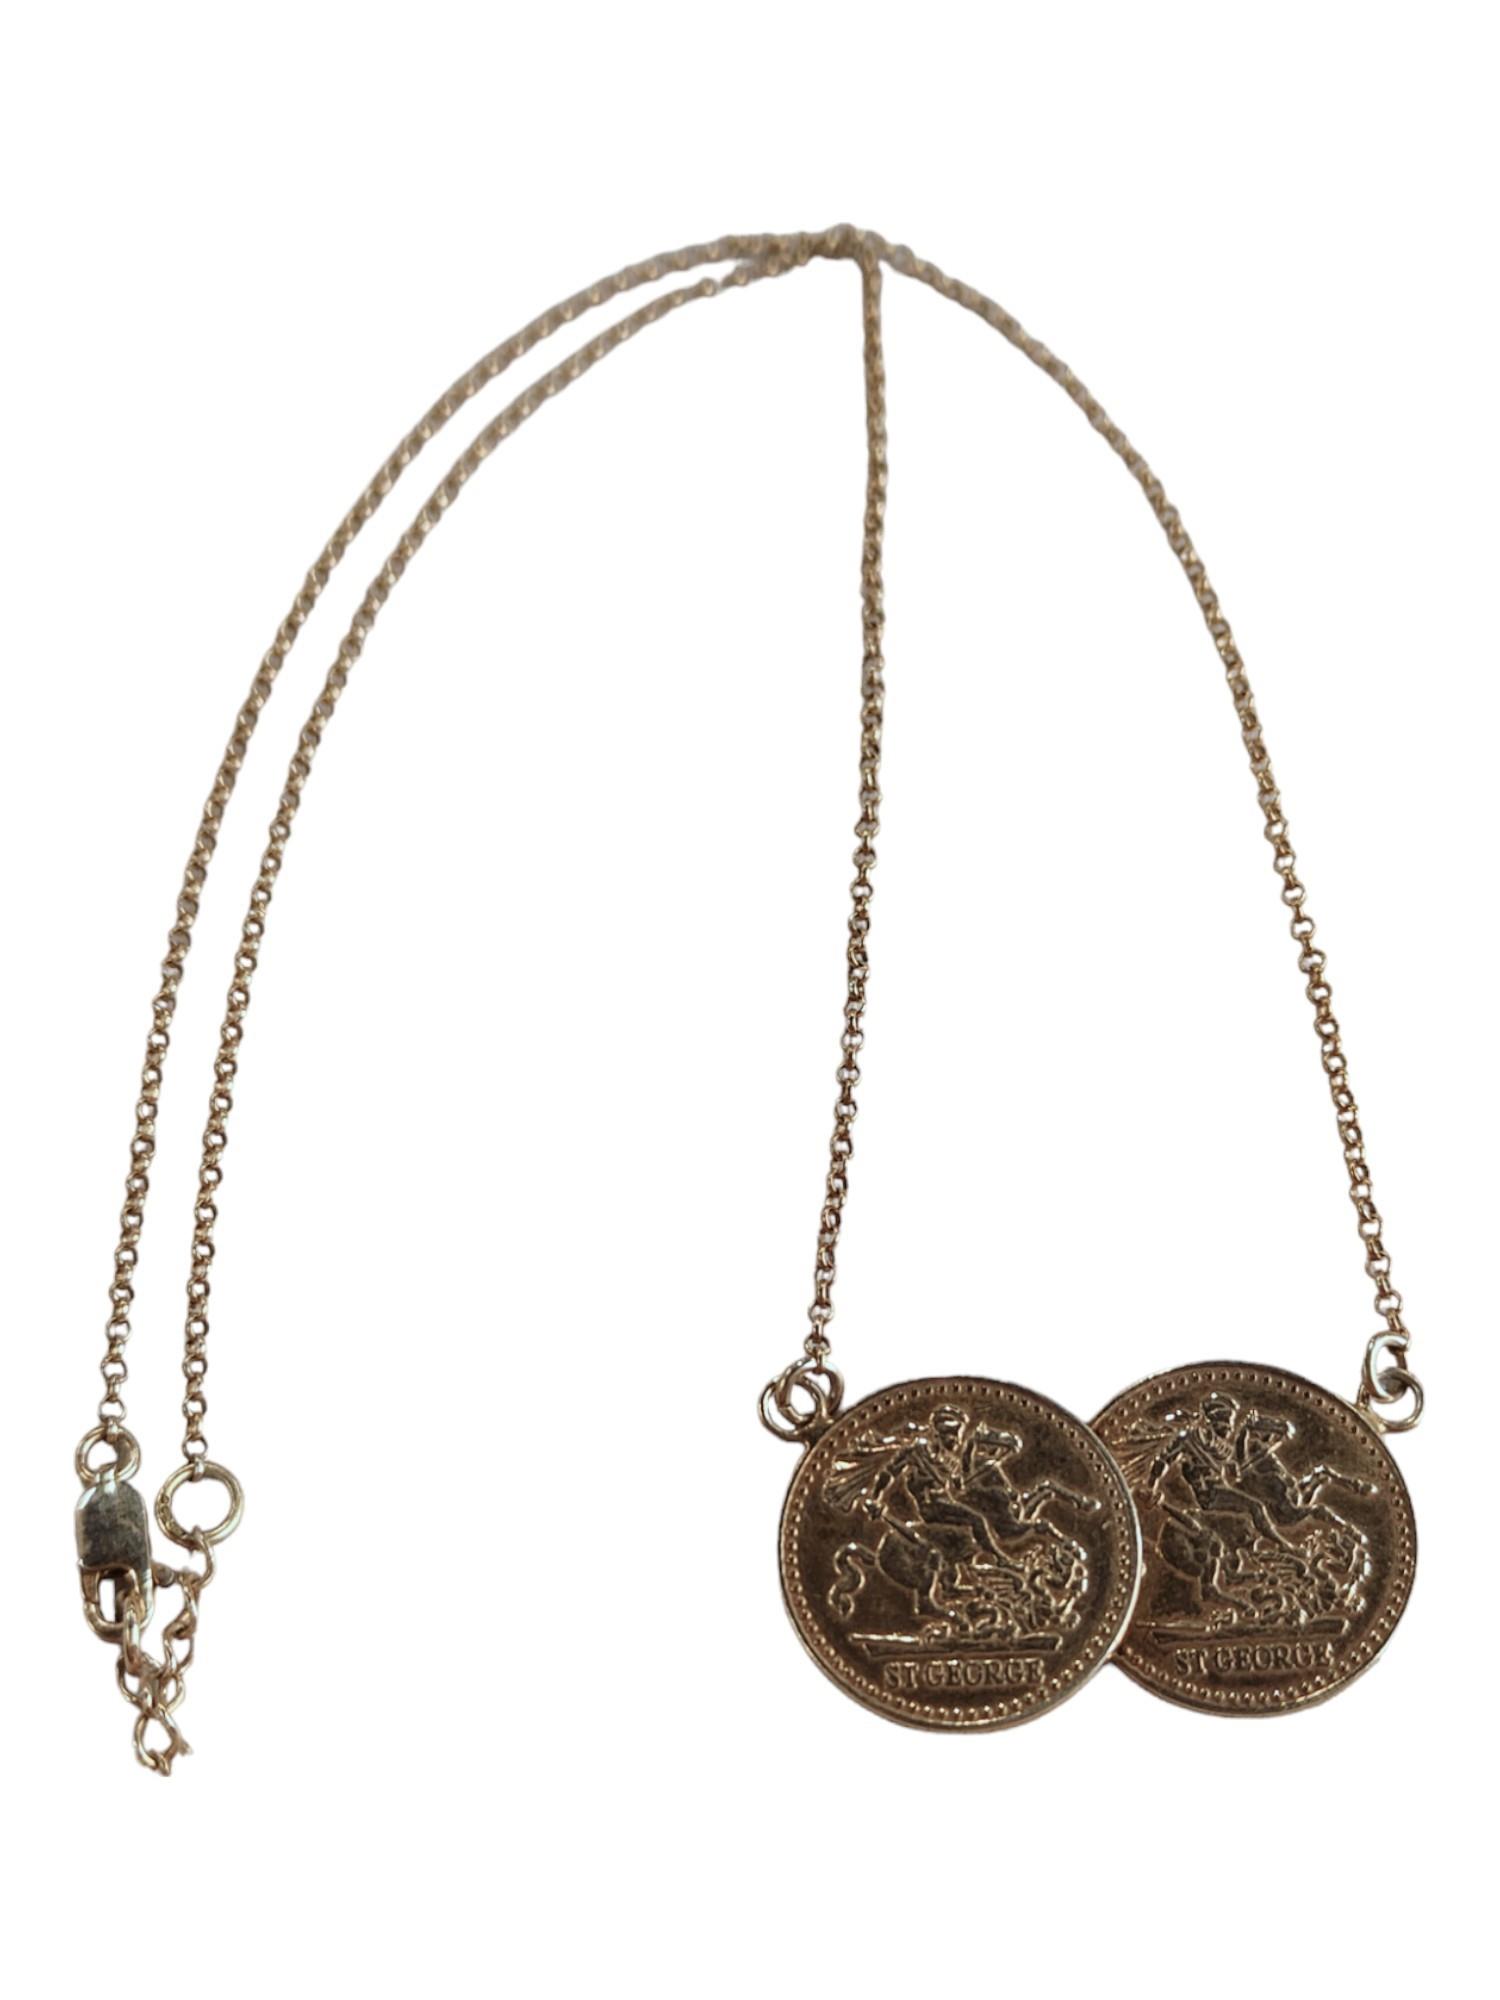 SILVER GILT DOUBLE COIN PENDANT ON CHAIN